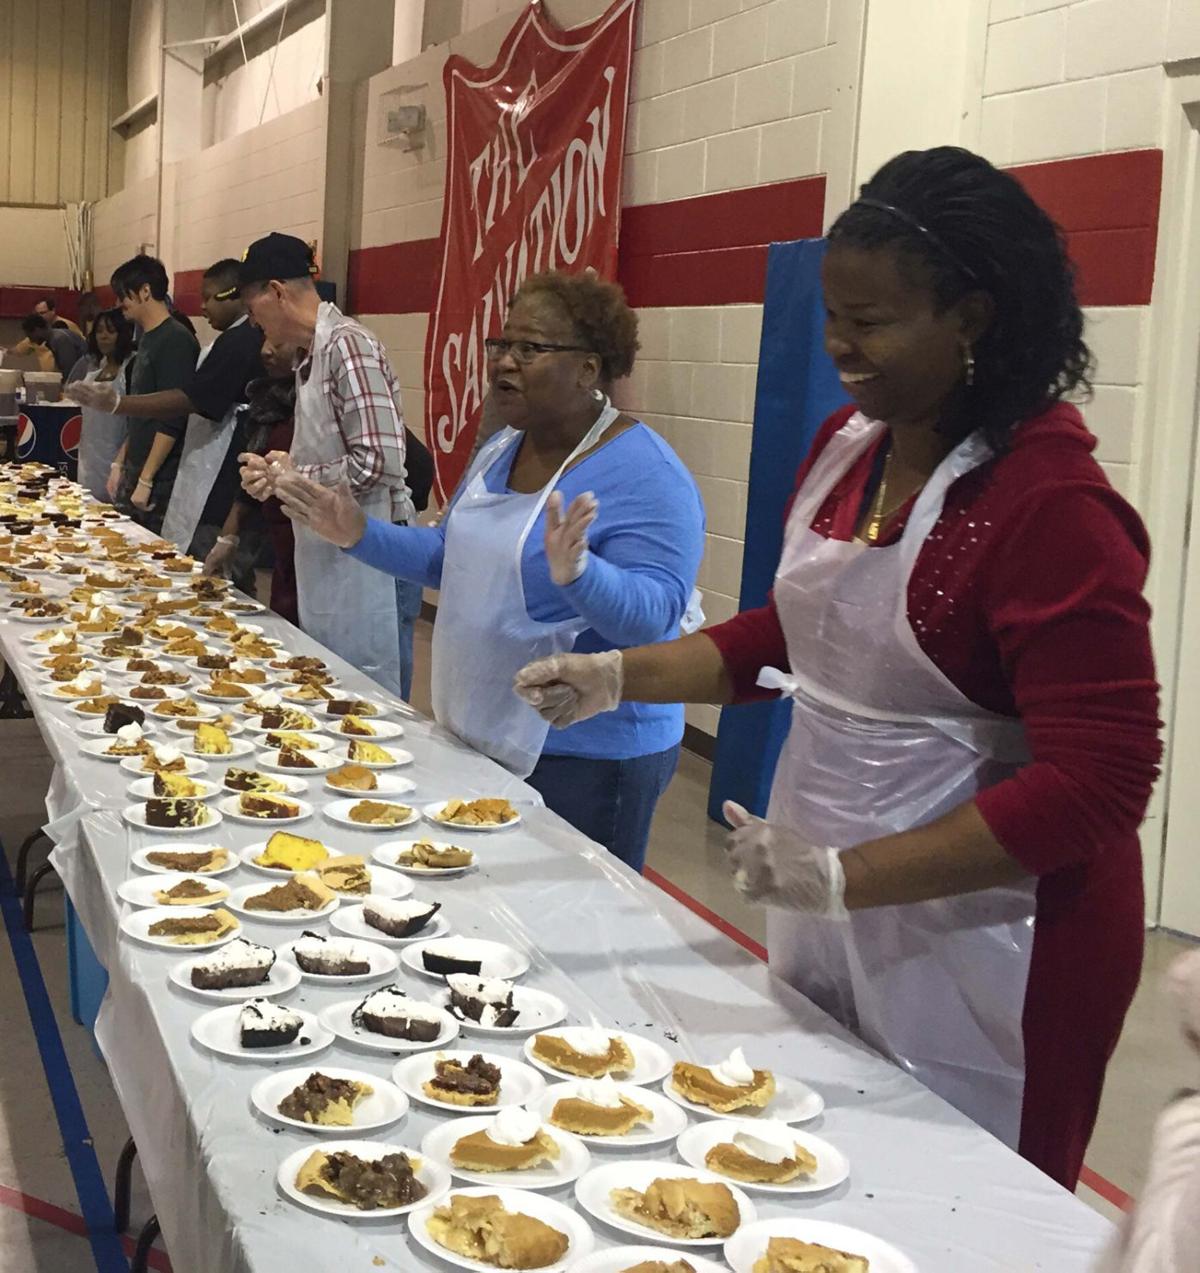 On Thanksgiving, volunteers dish up 300 meals at Danville Salvation